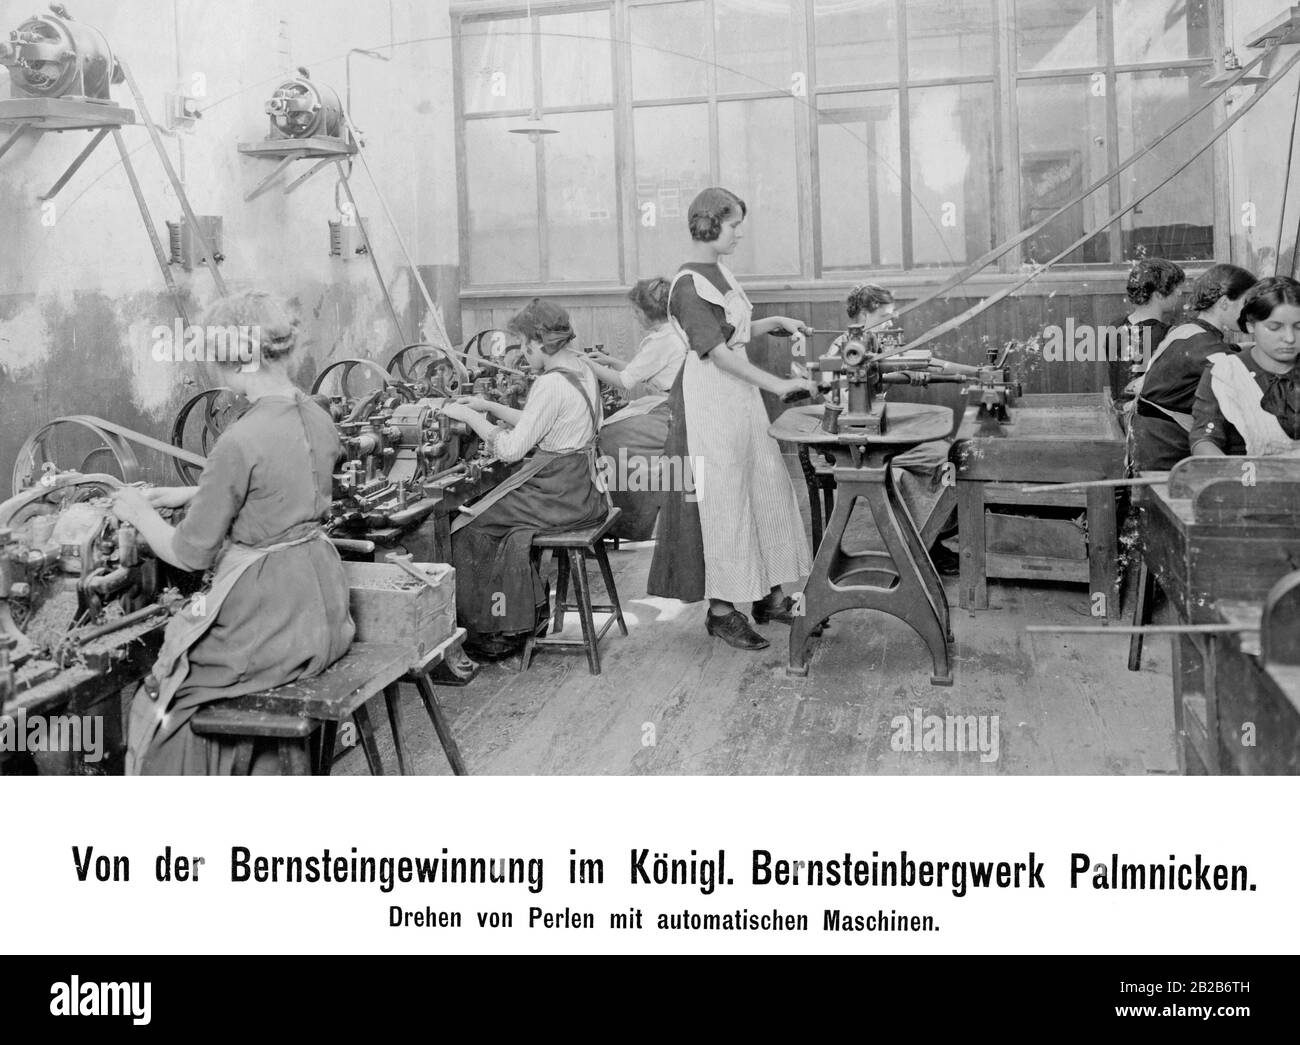 Women shaping beads with automatic machines in the Royal Amber Mine Palmnicken. Stock Photo